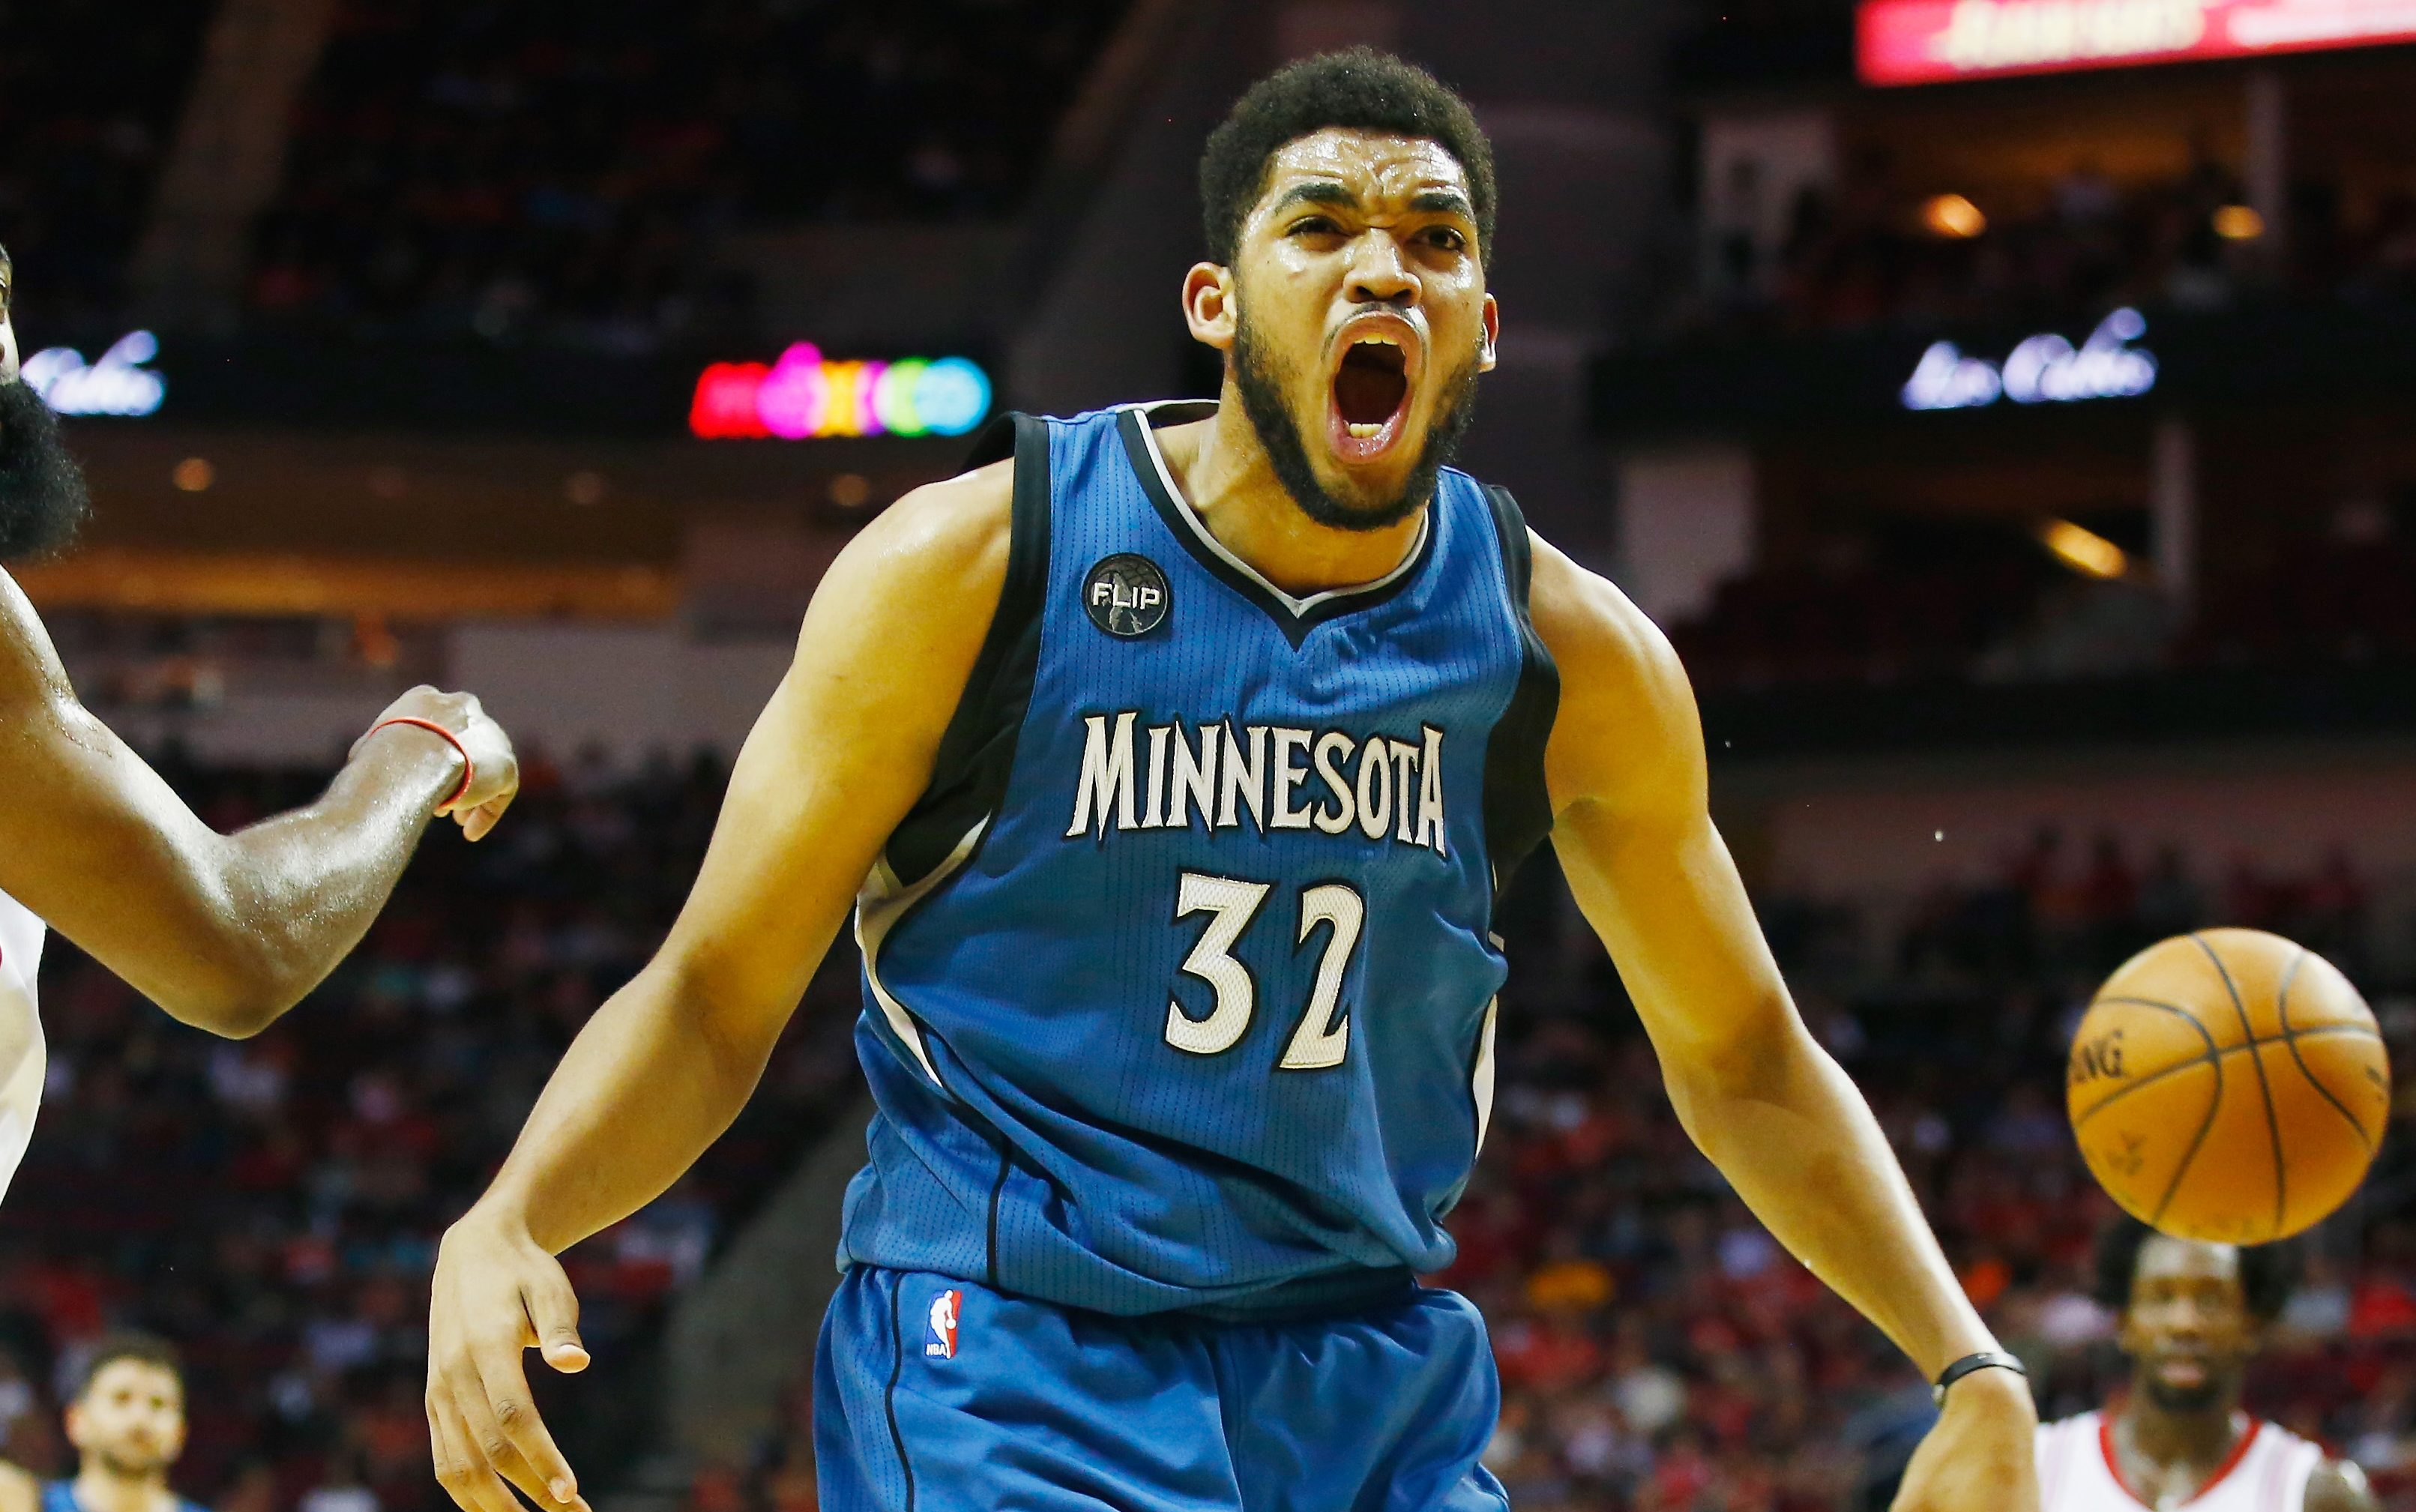 Nuggets vs. TWolves Live Stream How to Watch Online